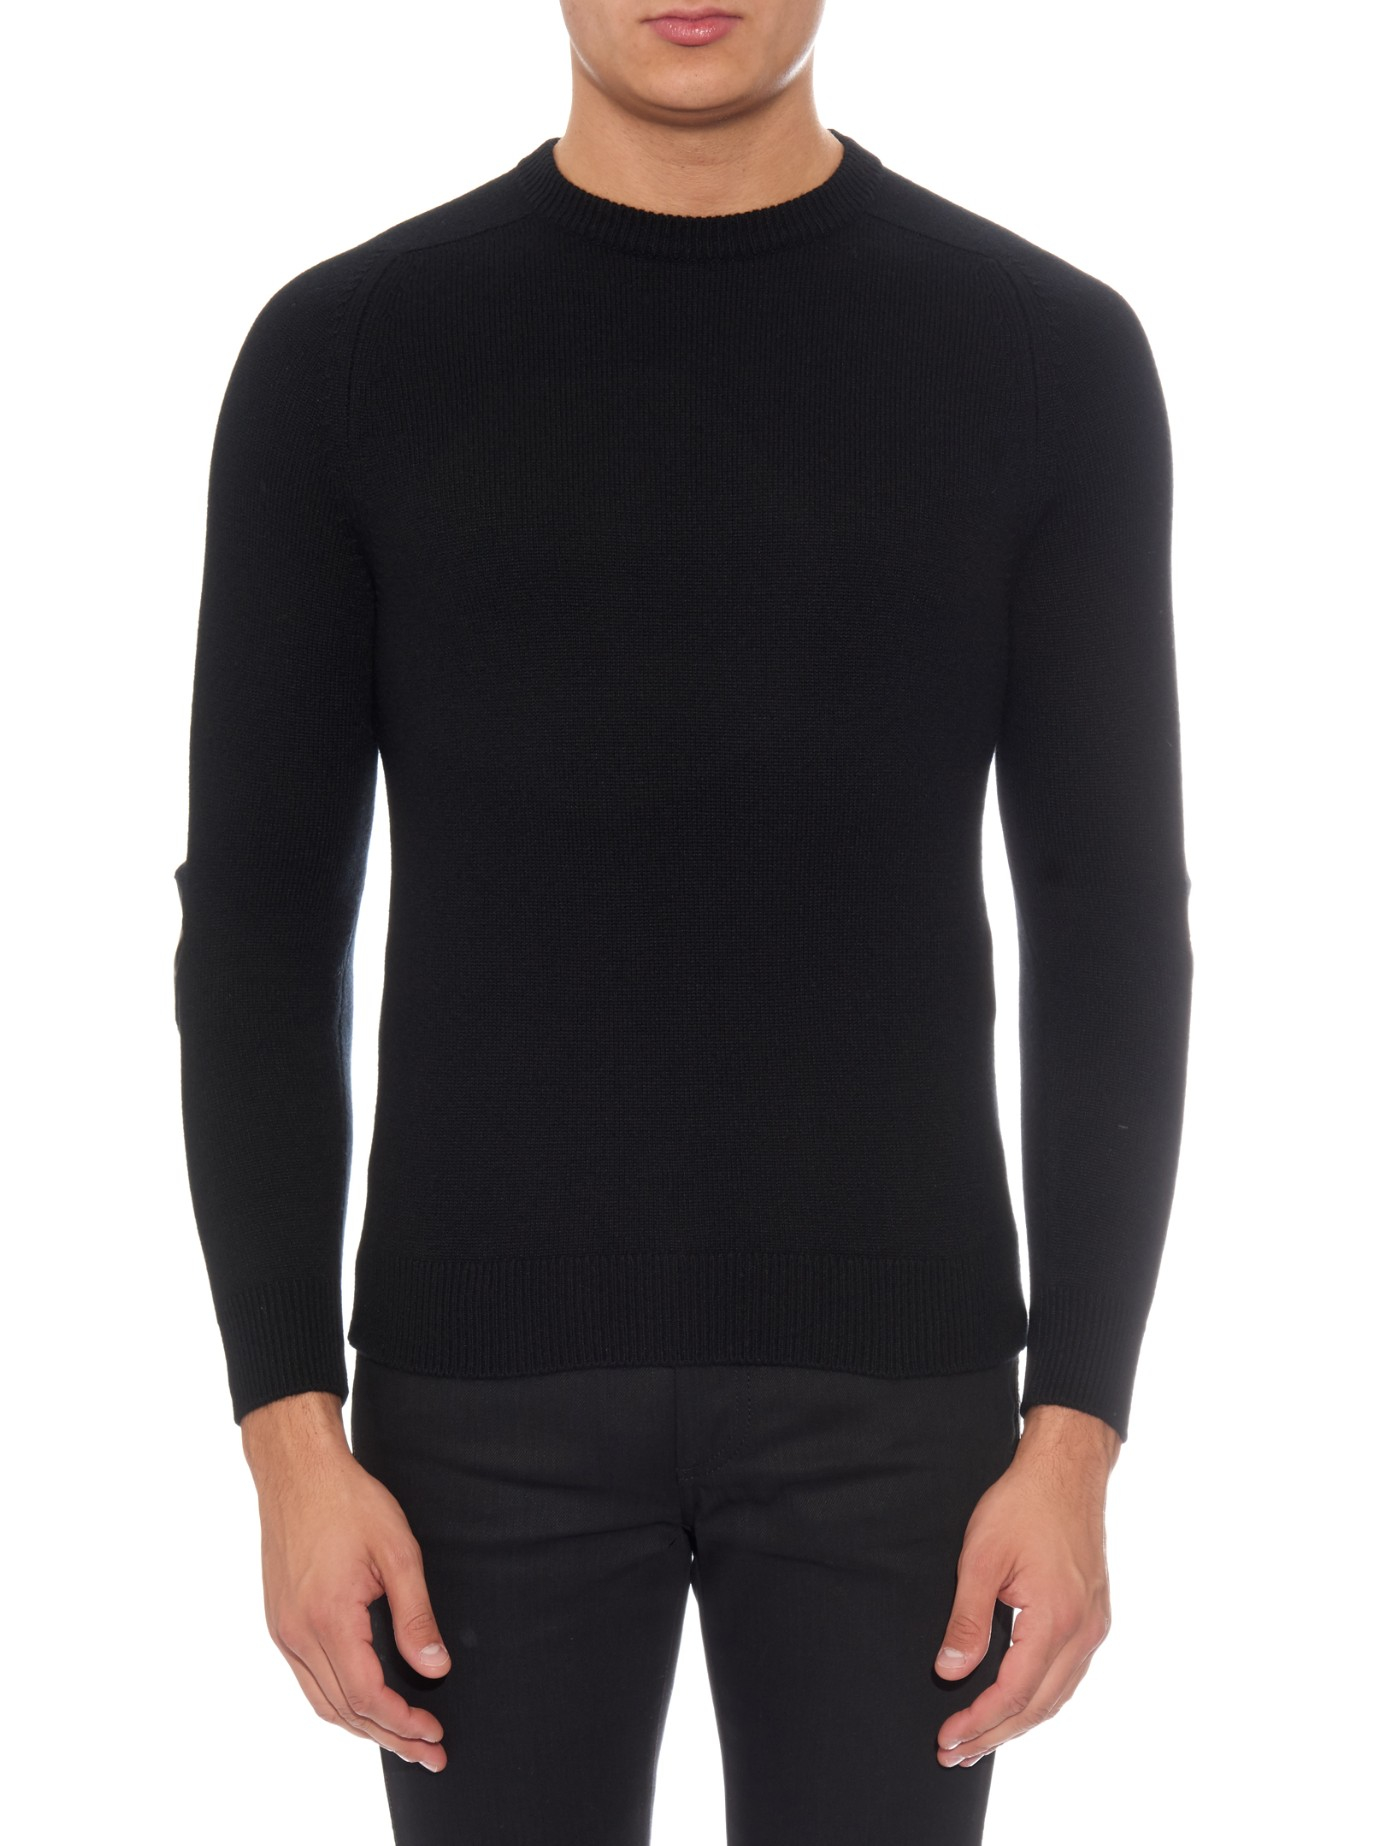 Saint Laurent Leather Elbow-patch Cashmere Sweater in Black for Men - Lyst